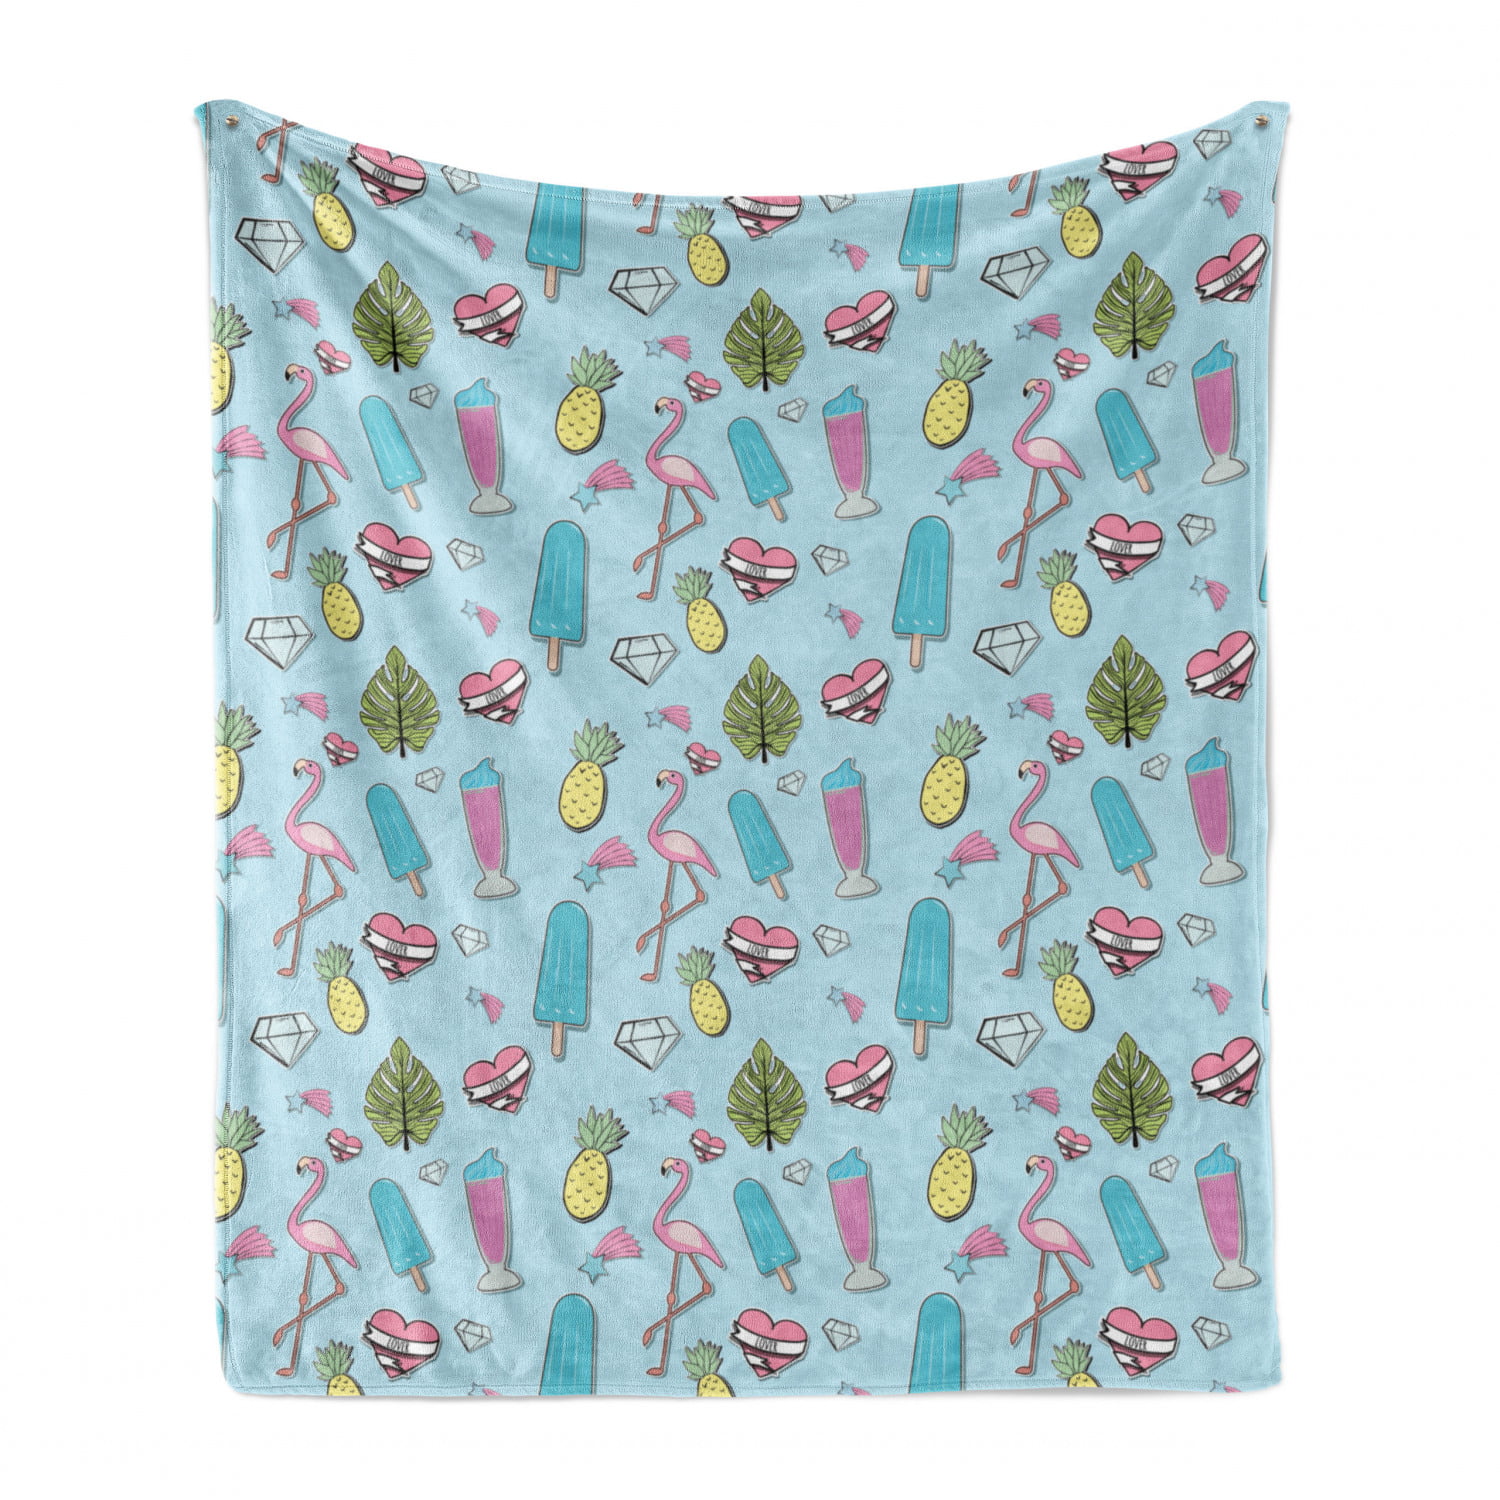 Flannel Fleece Accent Piece Soft Couch Cover for Adults Ambesonne Summer Throw Blanket Pale Blue Multicolor Repeating Fun Items of Popsicle Flamingo Pineapple Diamond Heart Star Leaf 50 x 70